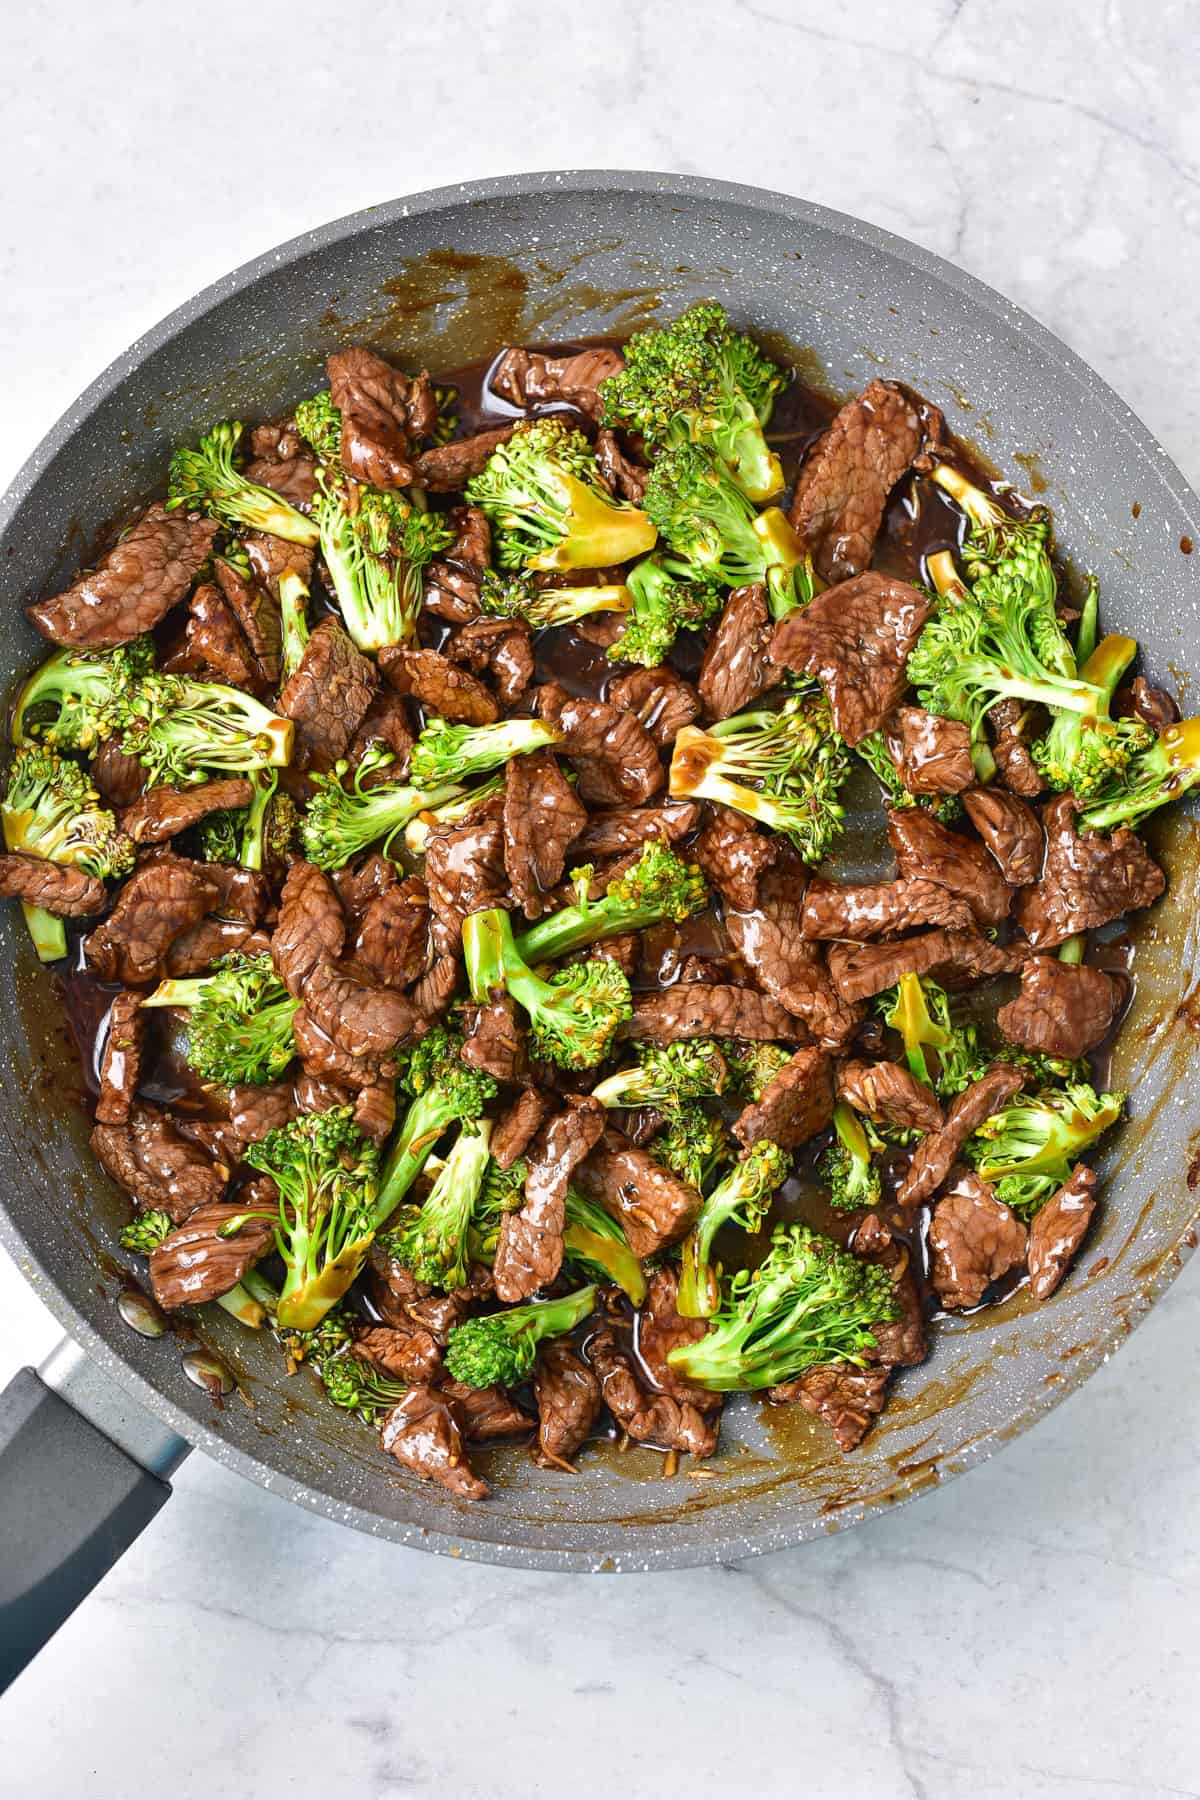 Beef and broccoli simmering in the sauce.